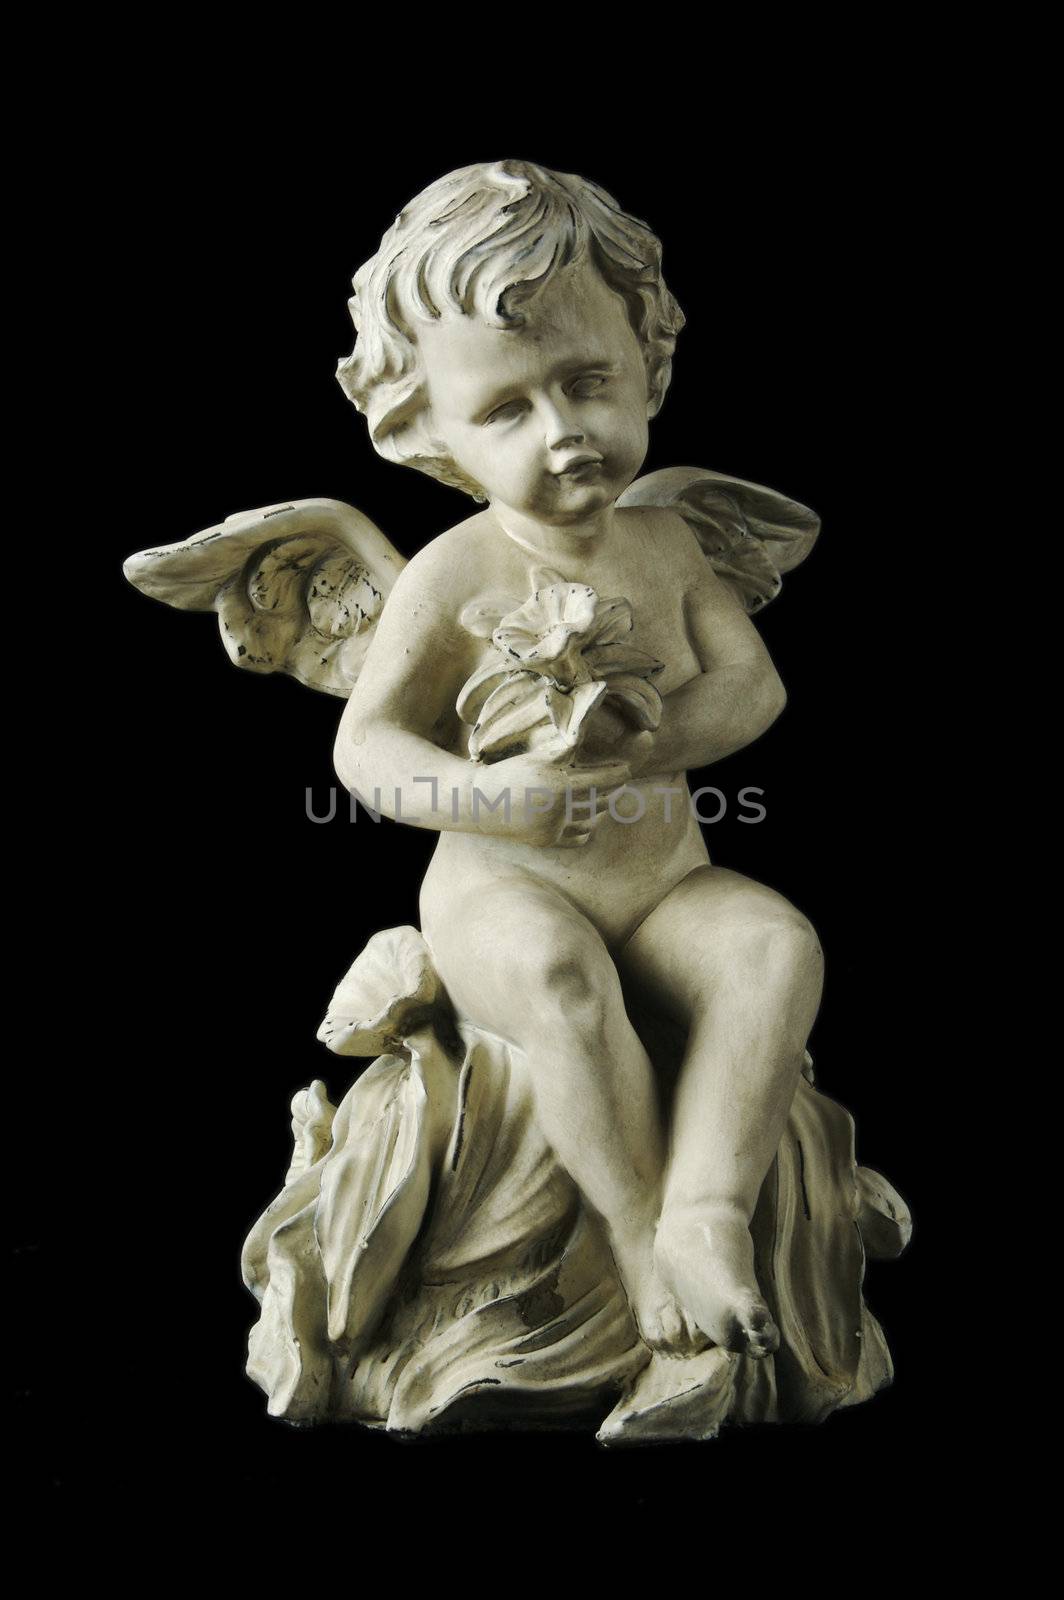 Cherub on Black Background by Feverpitched